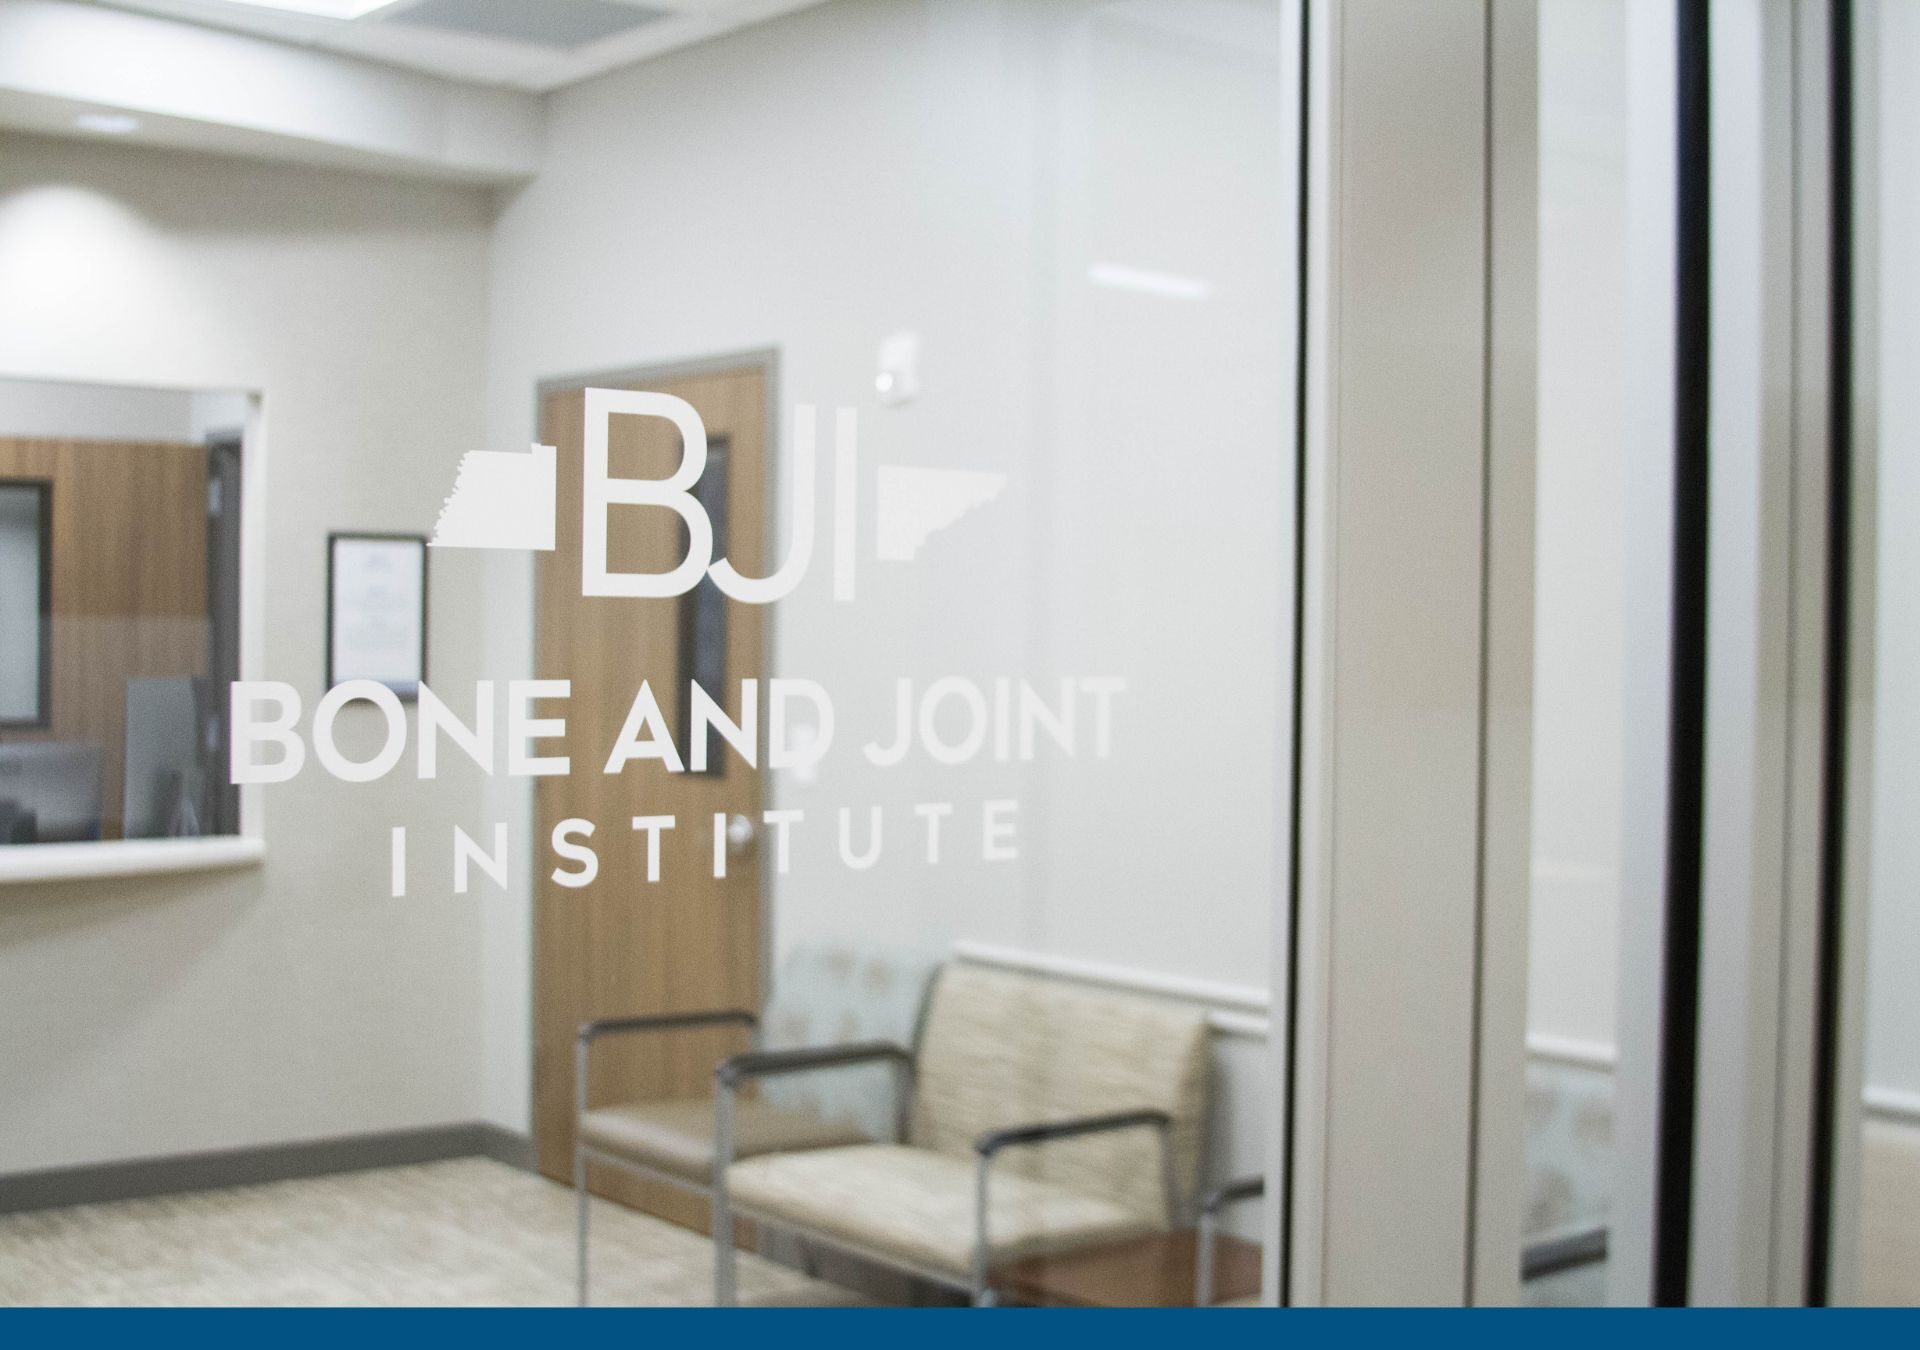 Bone and Joint Institute at Nolensville